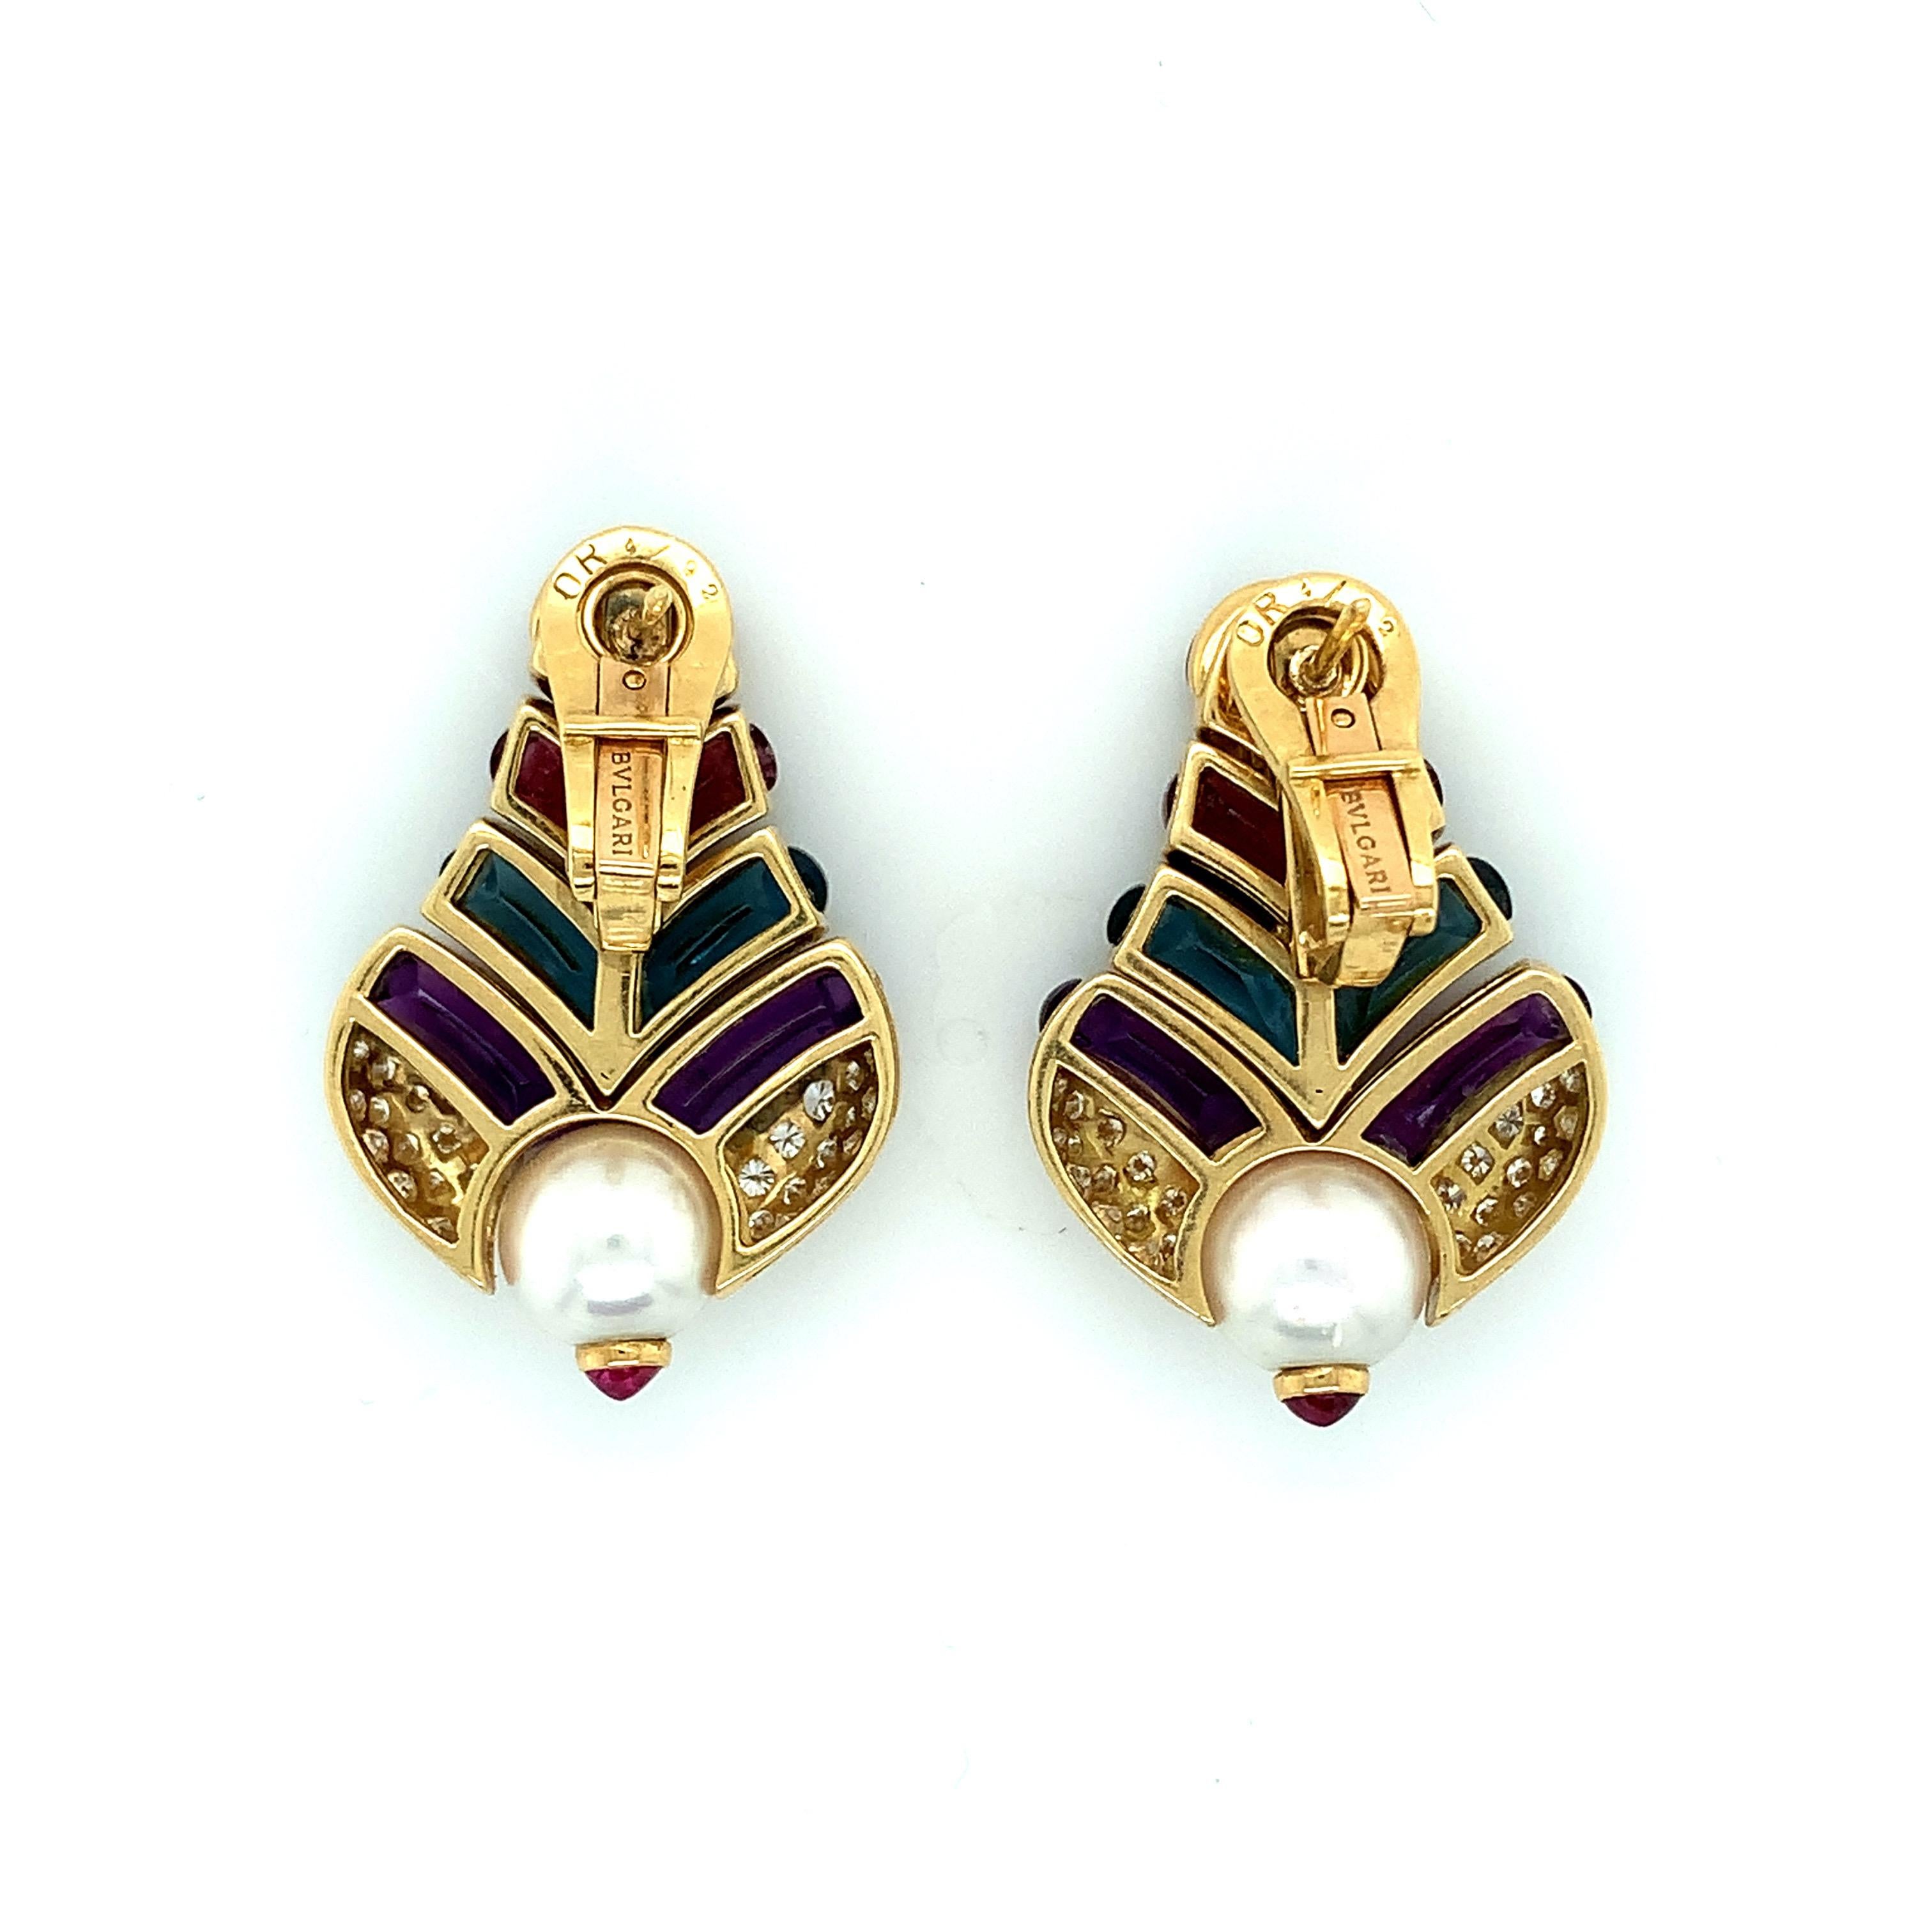 Bvlgari 18 karat yellow gold dangling earrings with multi-color stones, including amethyst, blue topaz, tourmaline, citrine, pearl, and diamond. The diamonds weigh approximately 1 carat. Circa 1970s. Marked: Bvlgari / 750. Total weight: 27.6 grams.